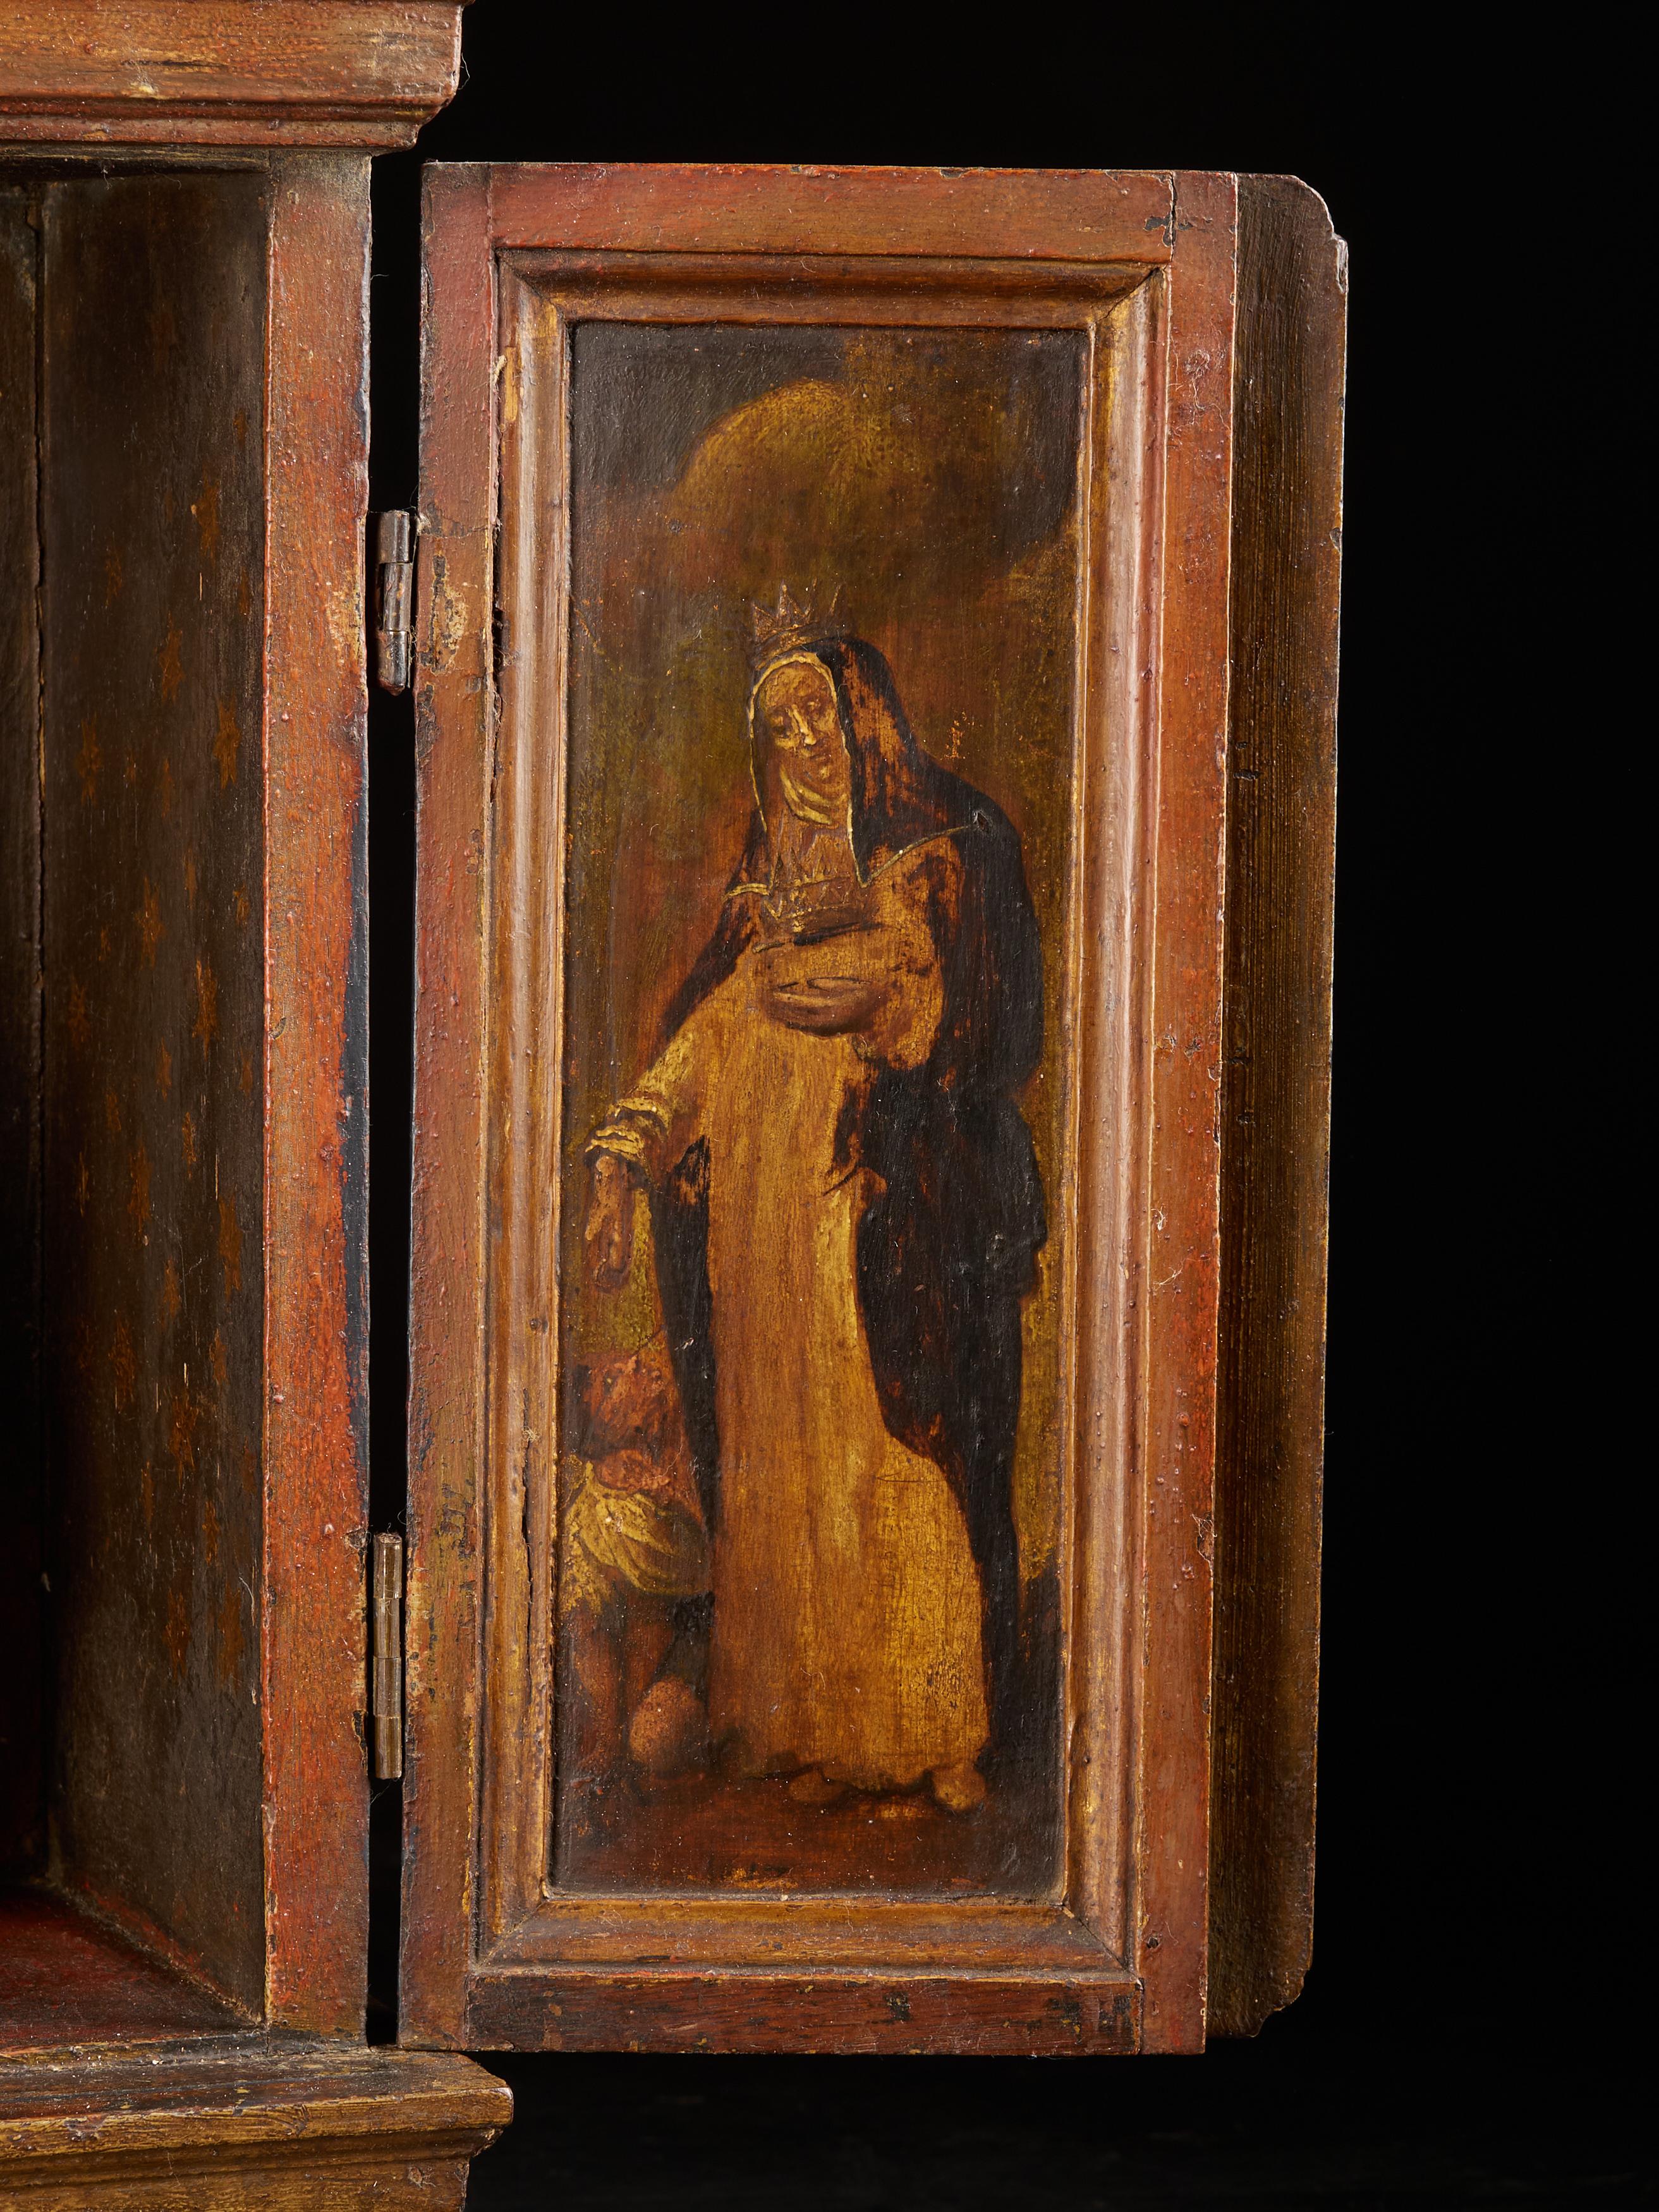 Flemish Small Terracotta Statue in Wooden Reliquary with Decorated Doors 2